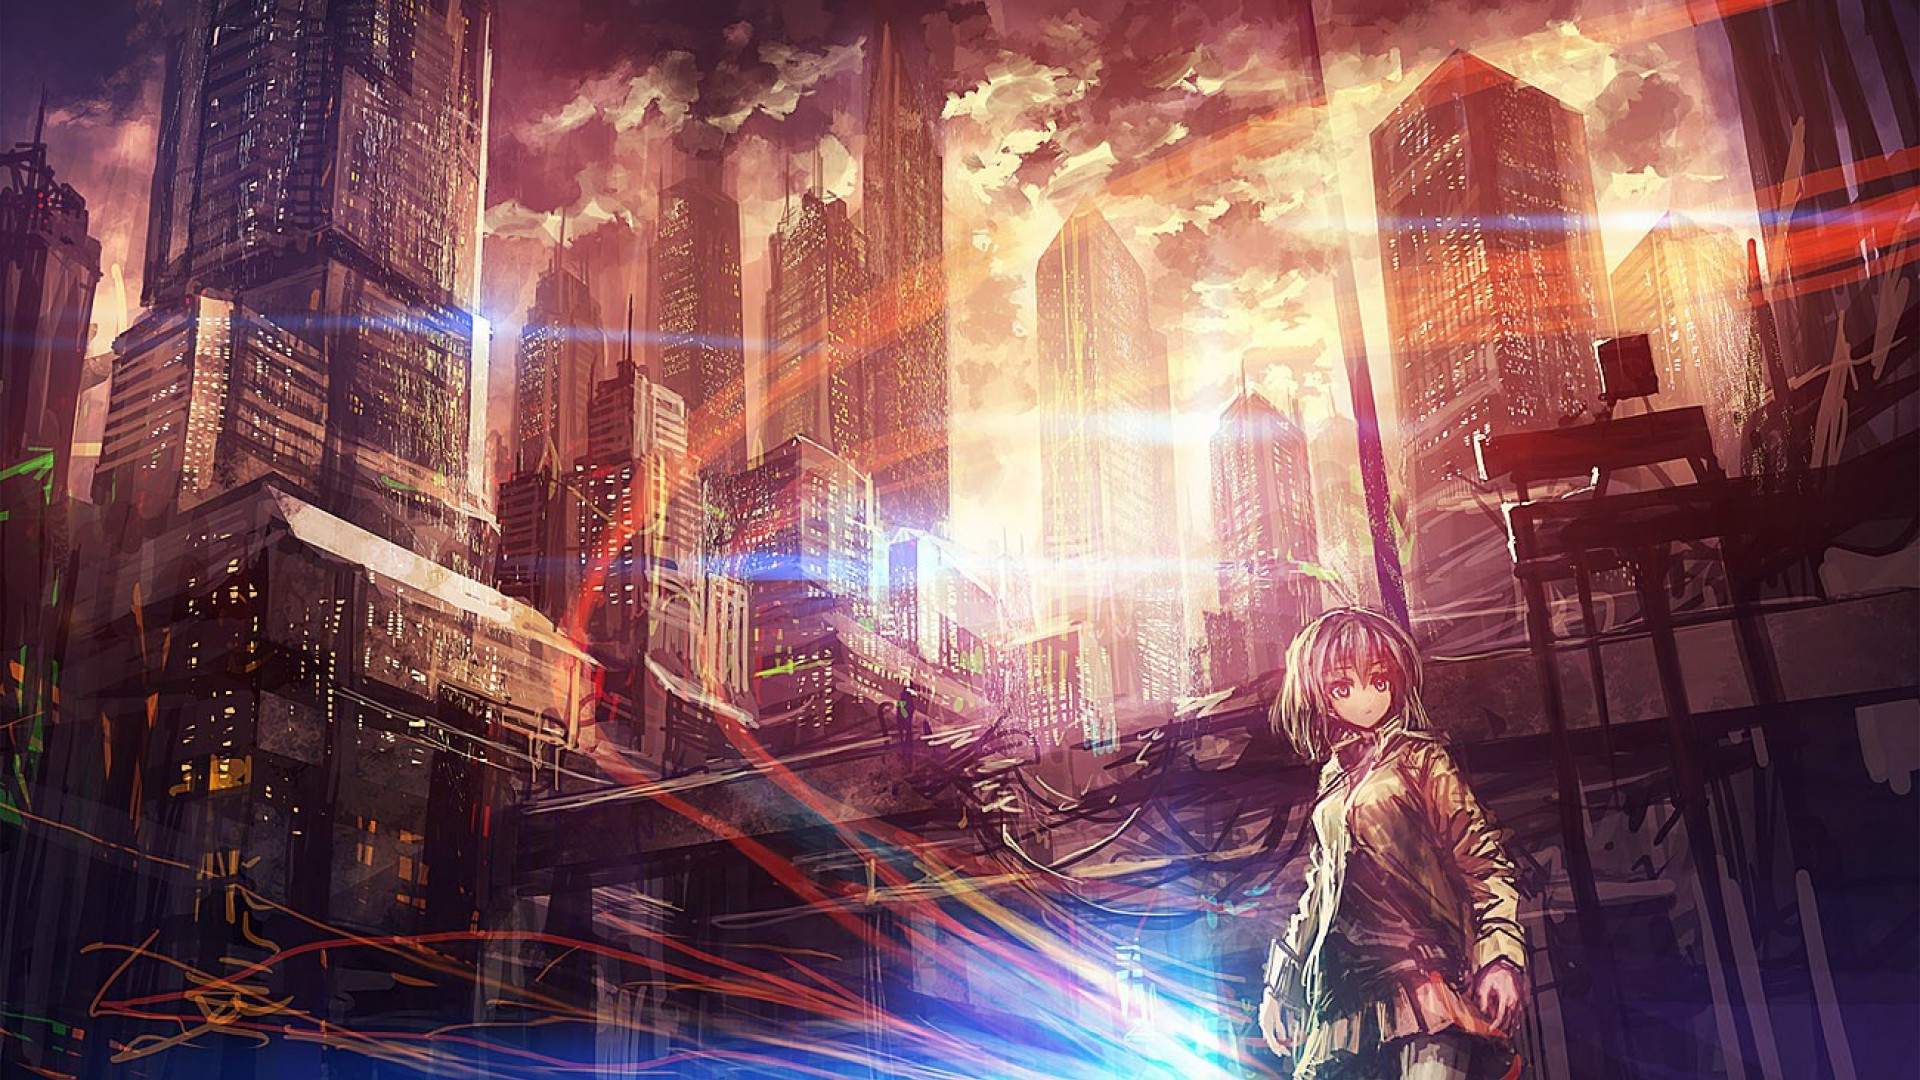 1920x1080 ...  Anime City Scenery Wallpapers Background with High Definition